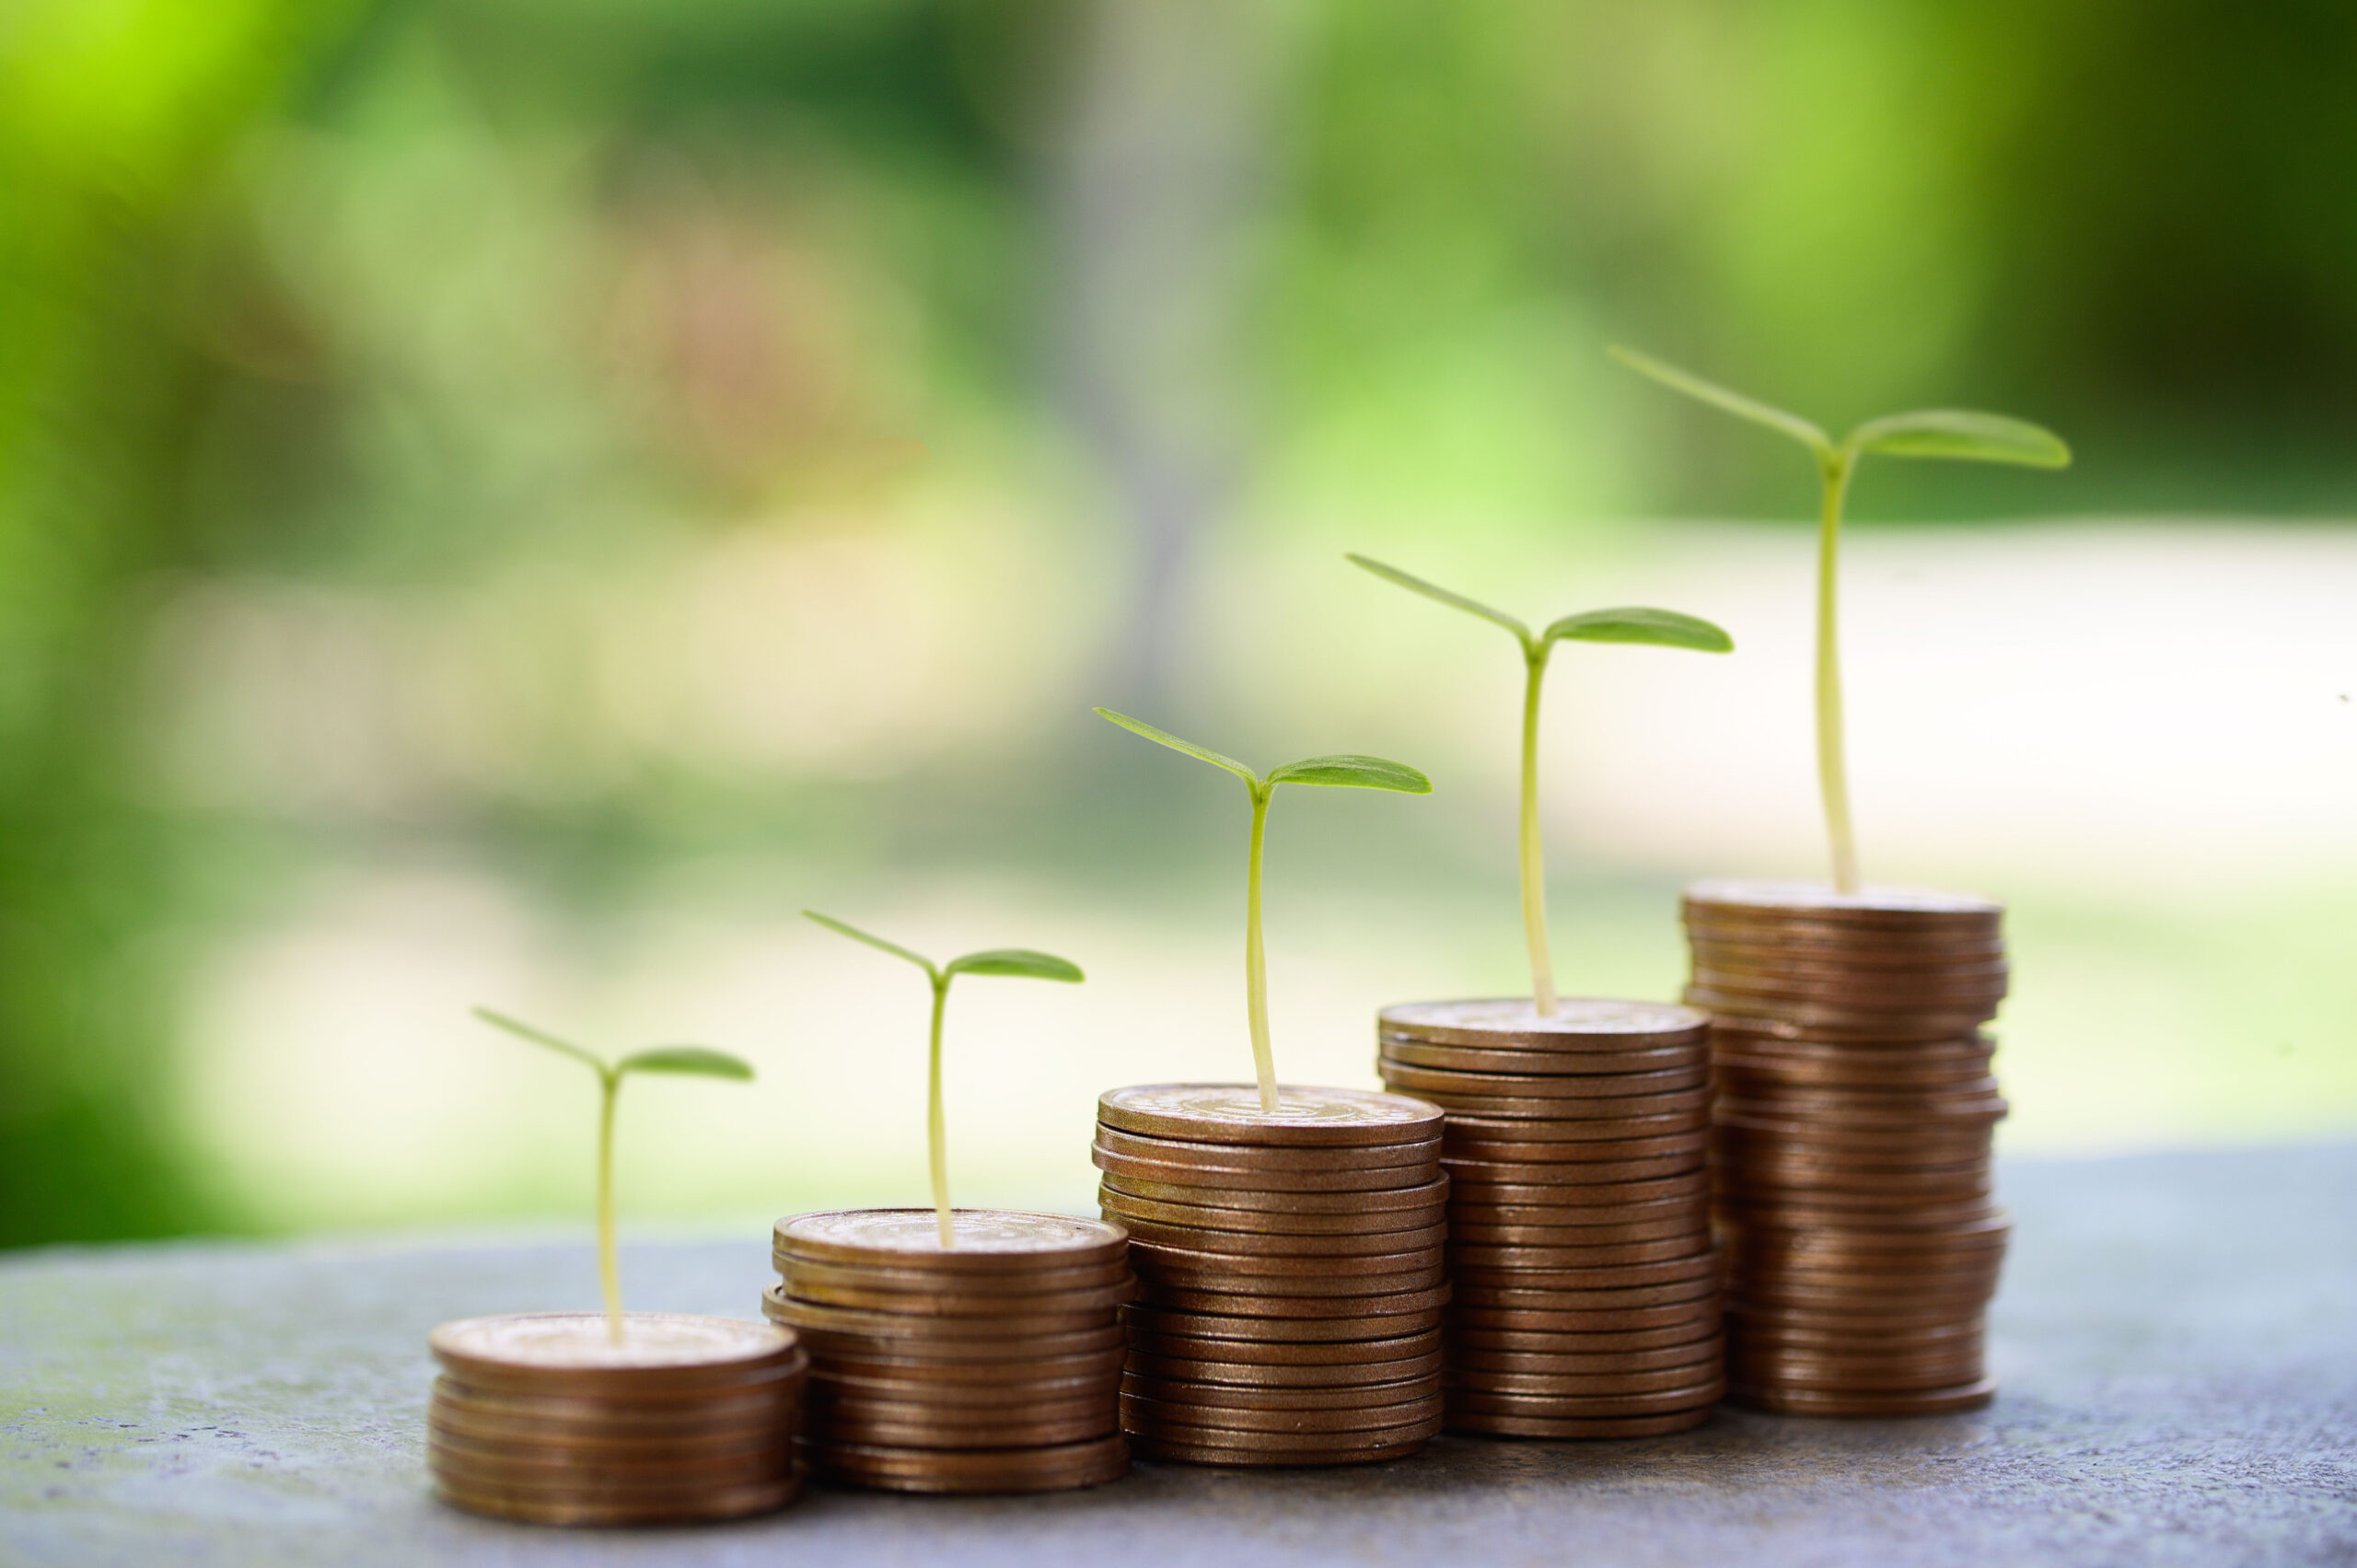 Finances and Flourishing: The impact of resources on well-being 